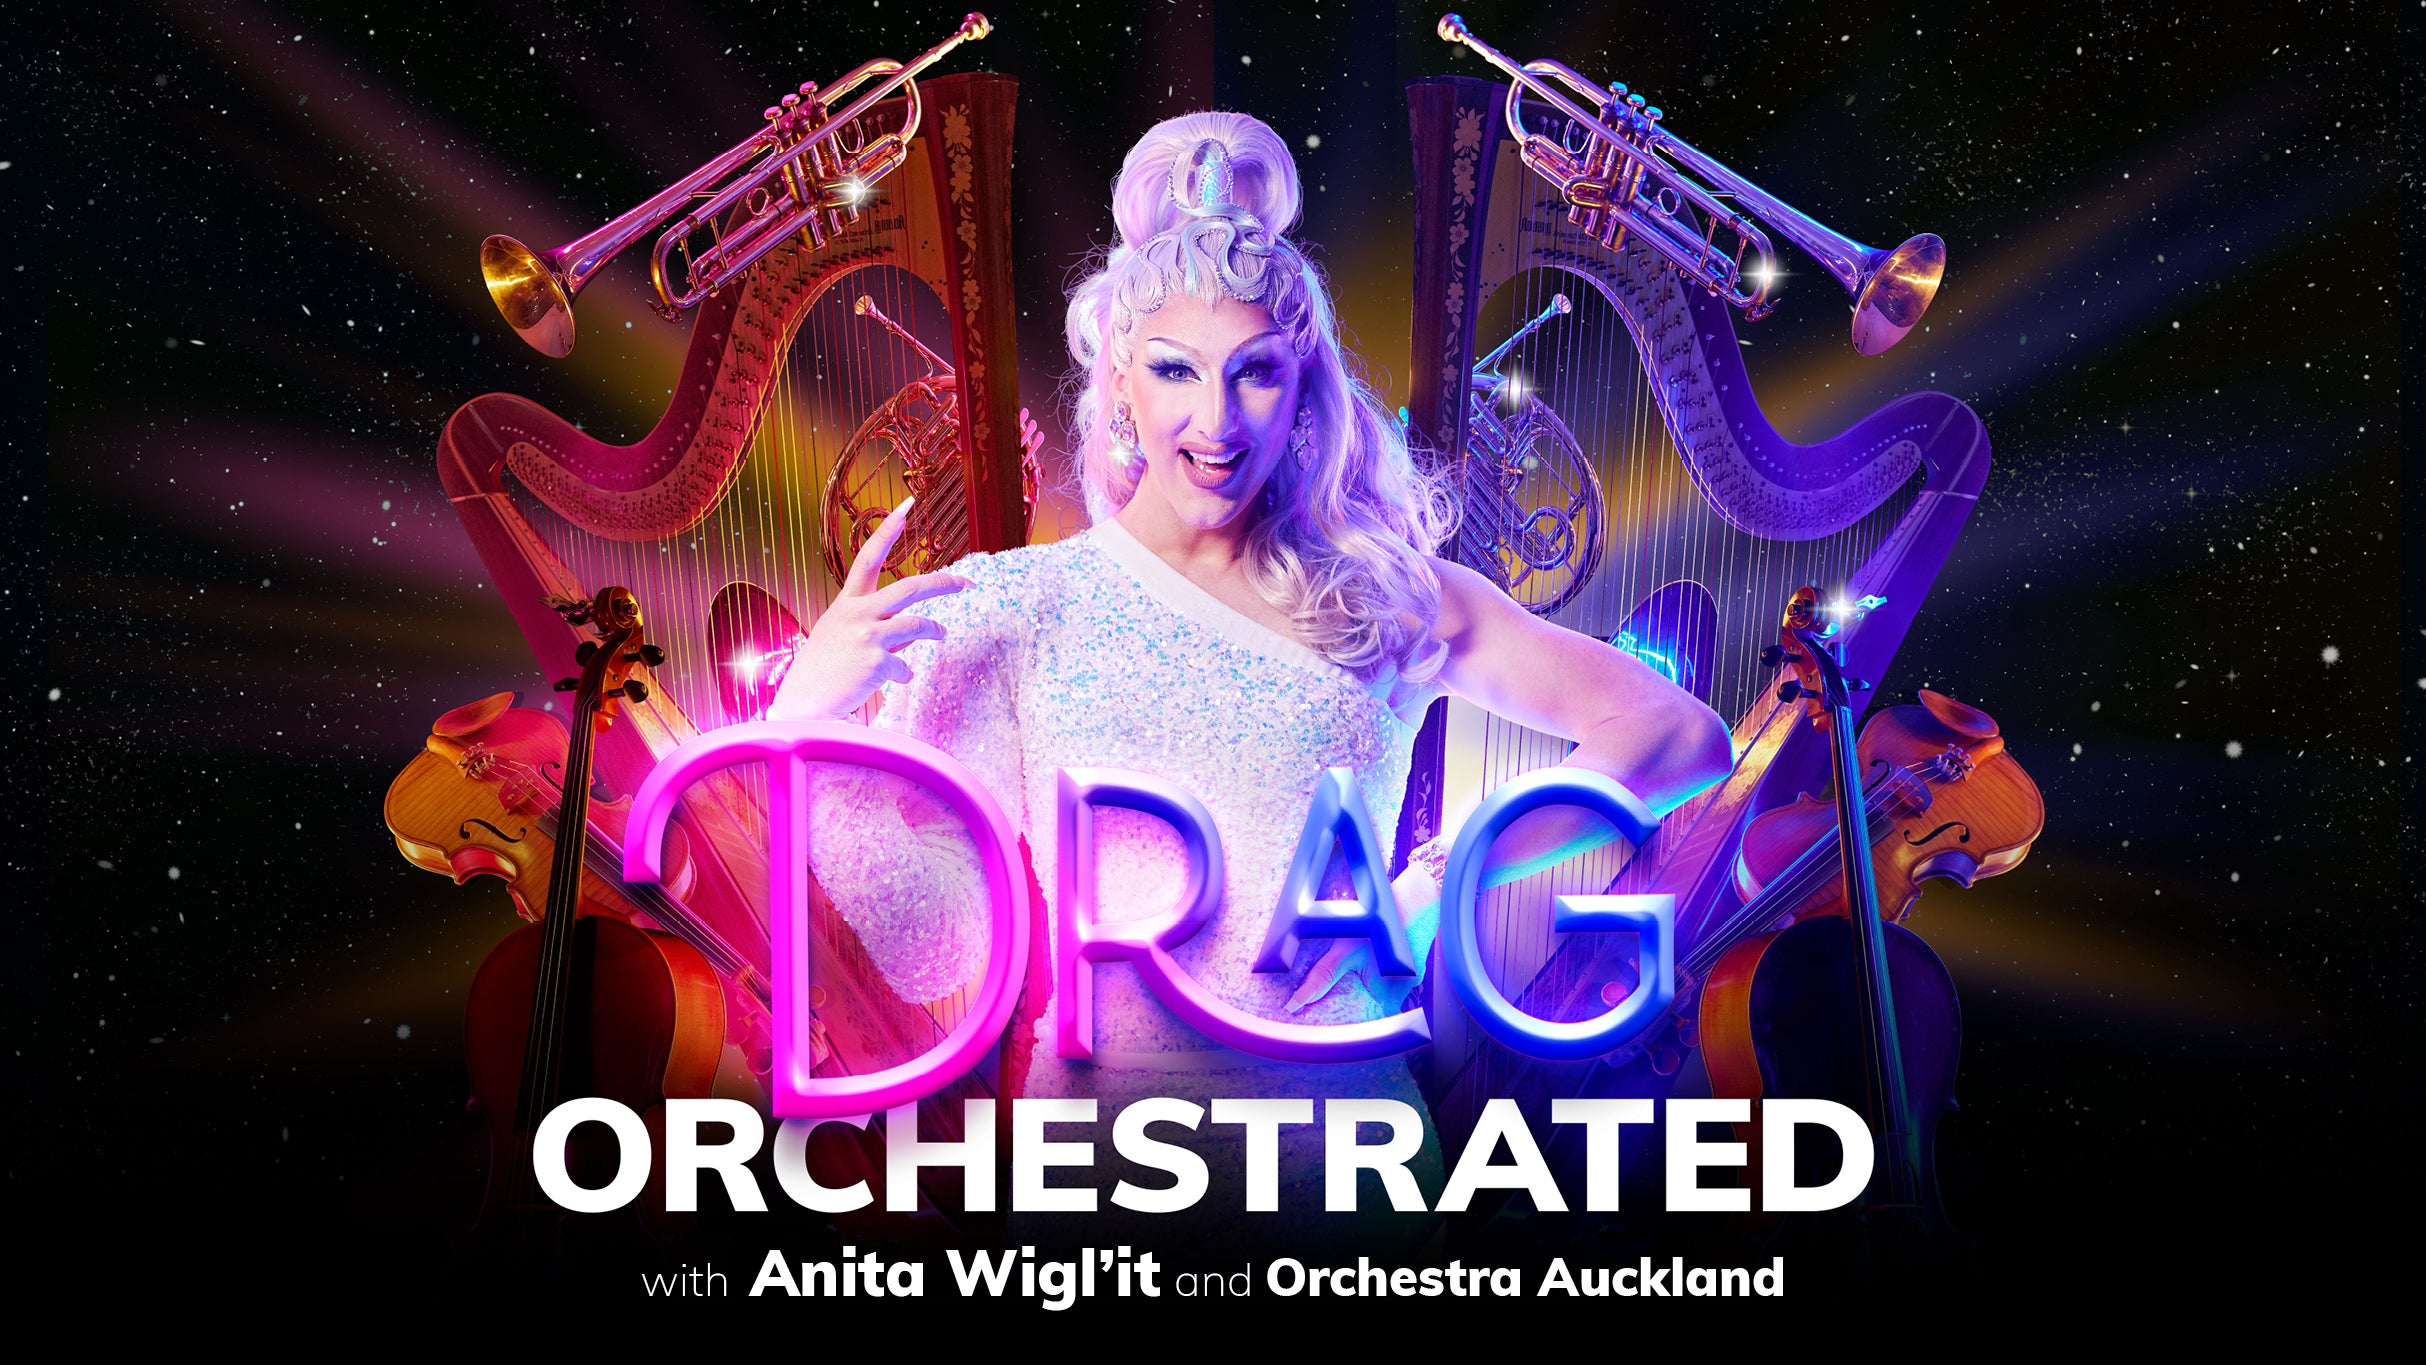 Image used with permission from Ticketmaster | Drag Orchestrated tickets